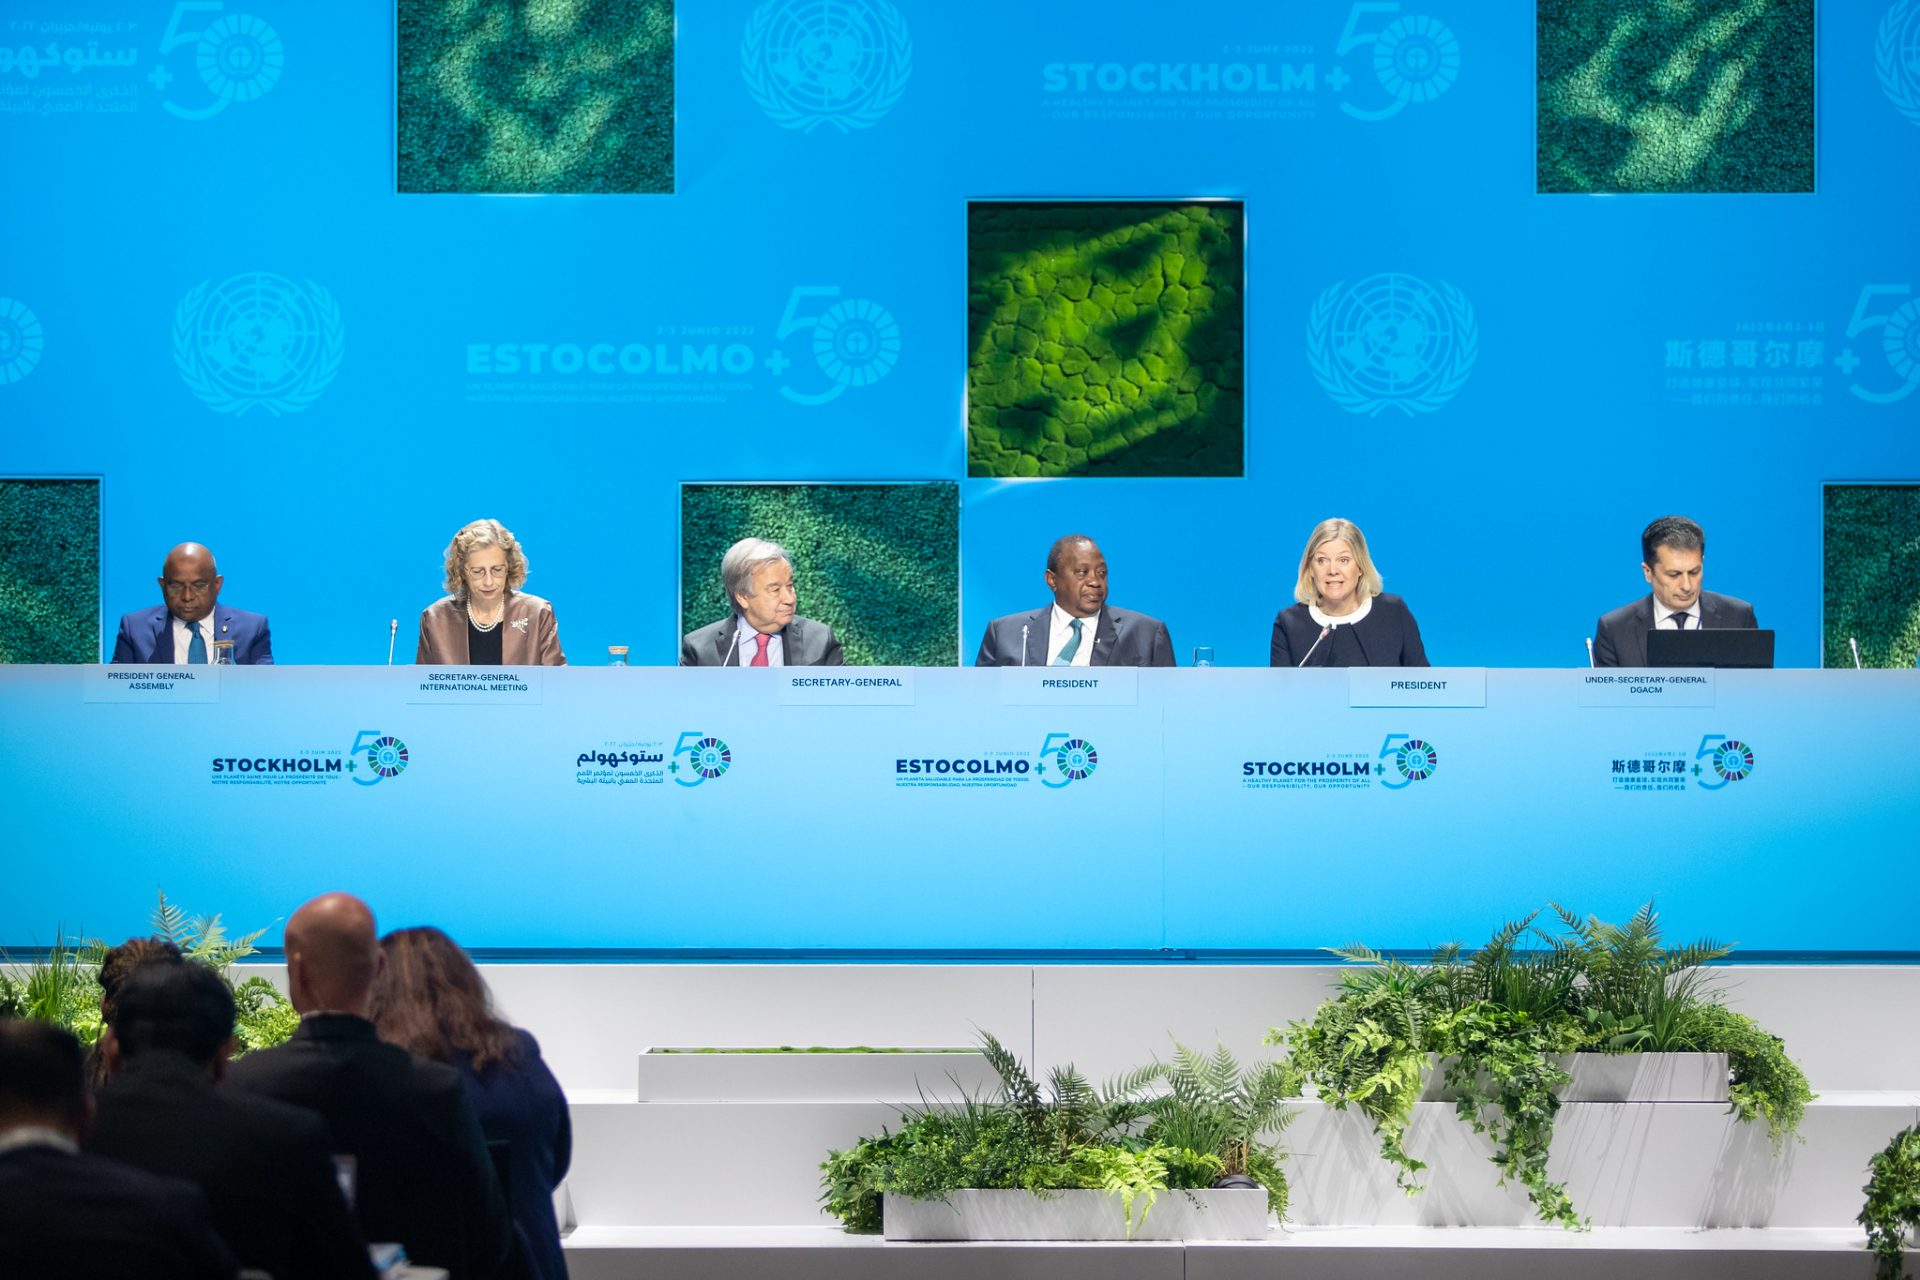 Six people sitting at high table in front of audience with blue background